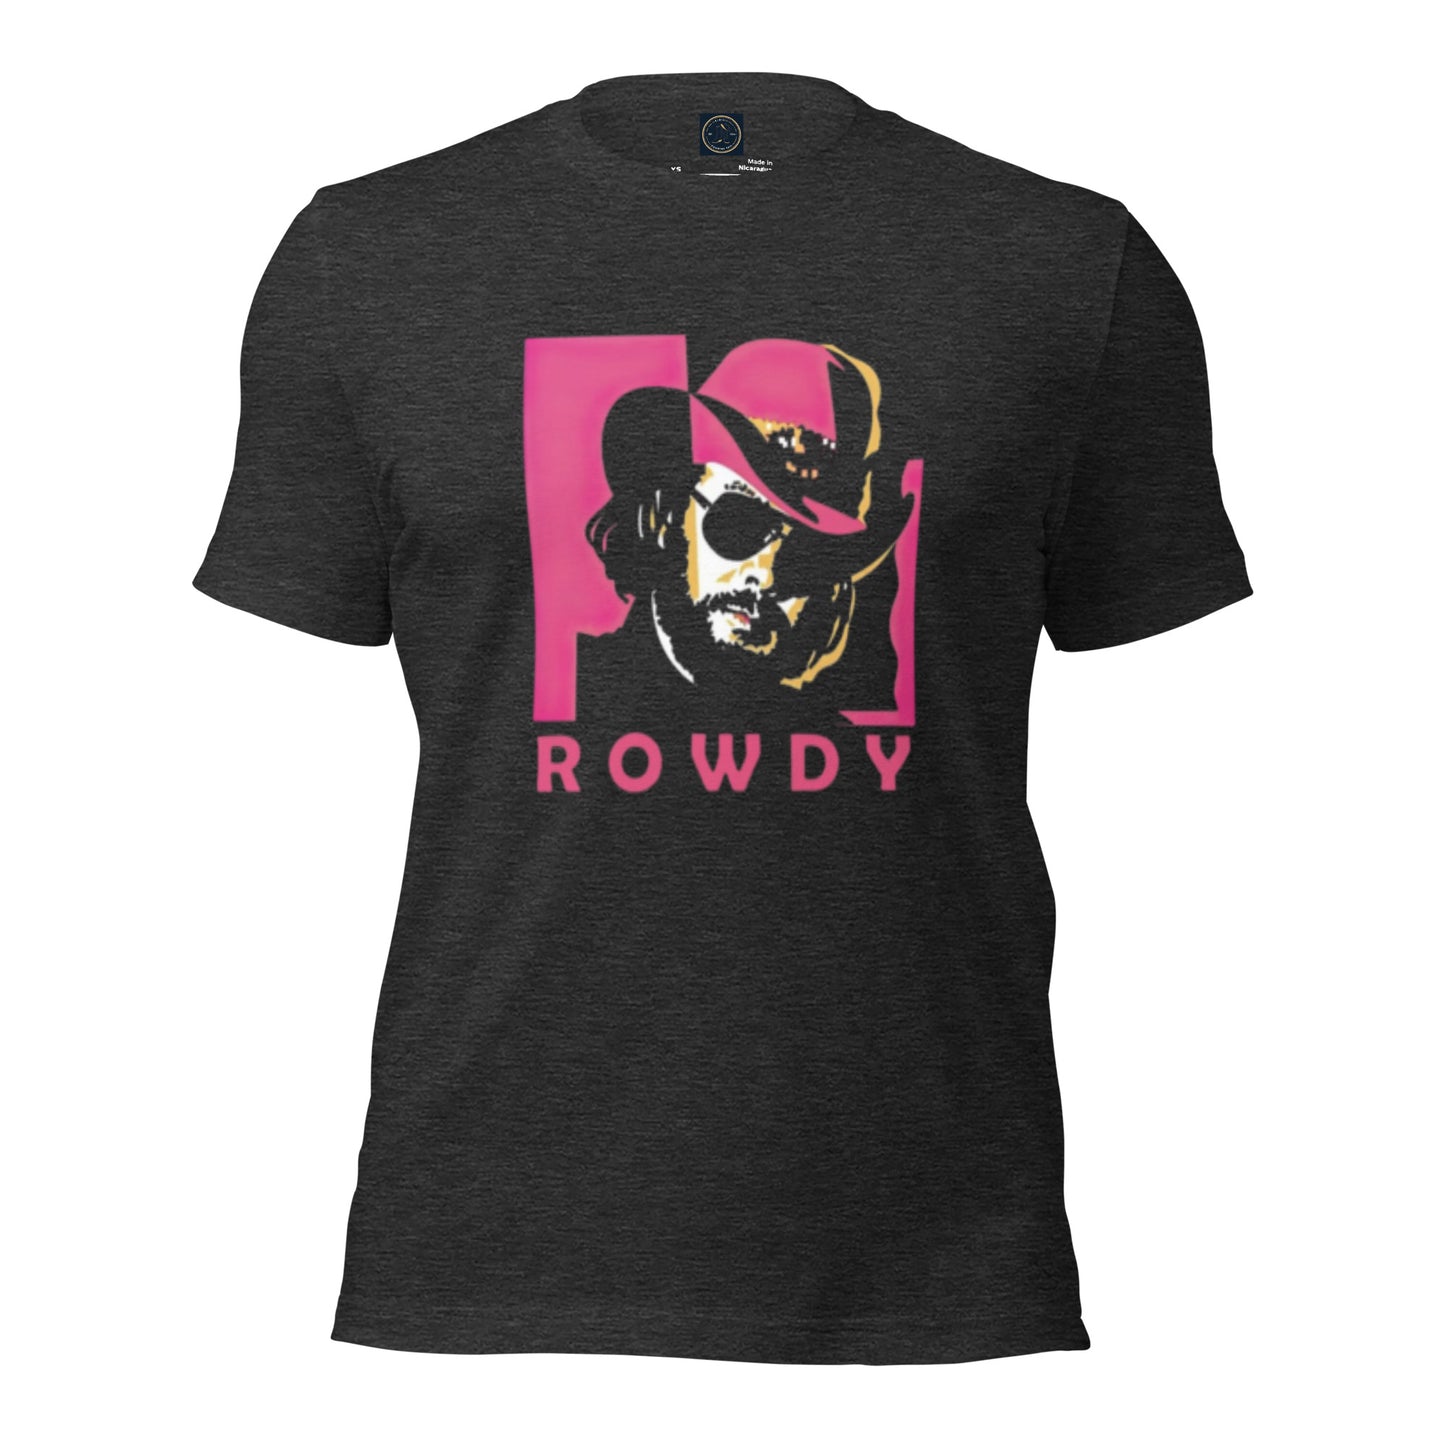 Rowdy - Classic Country Tees